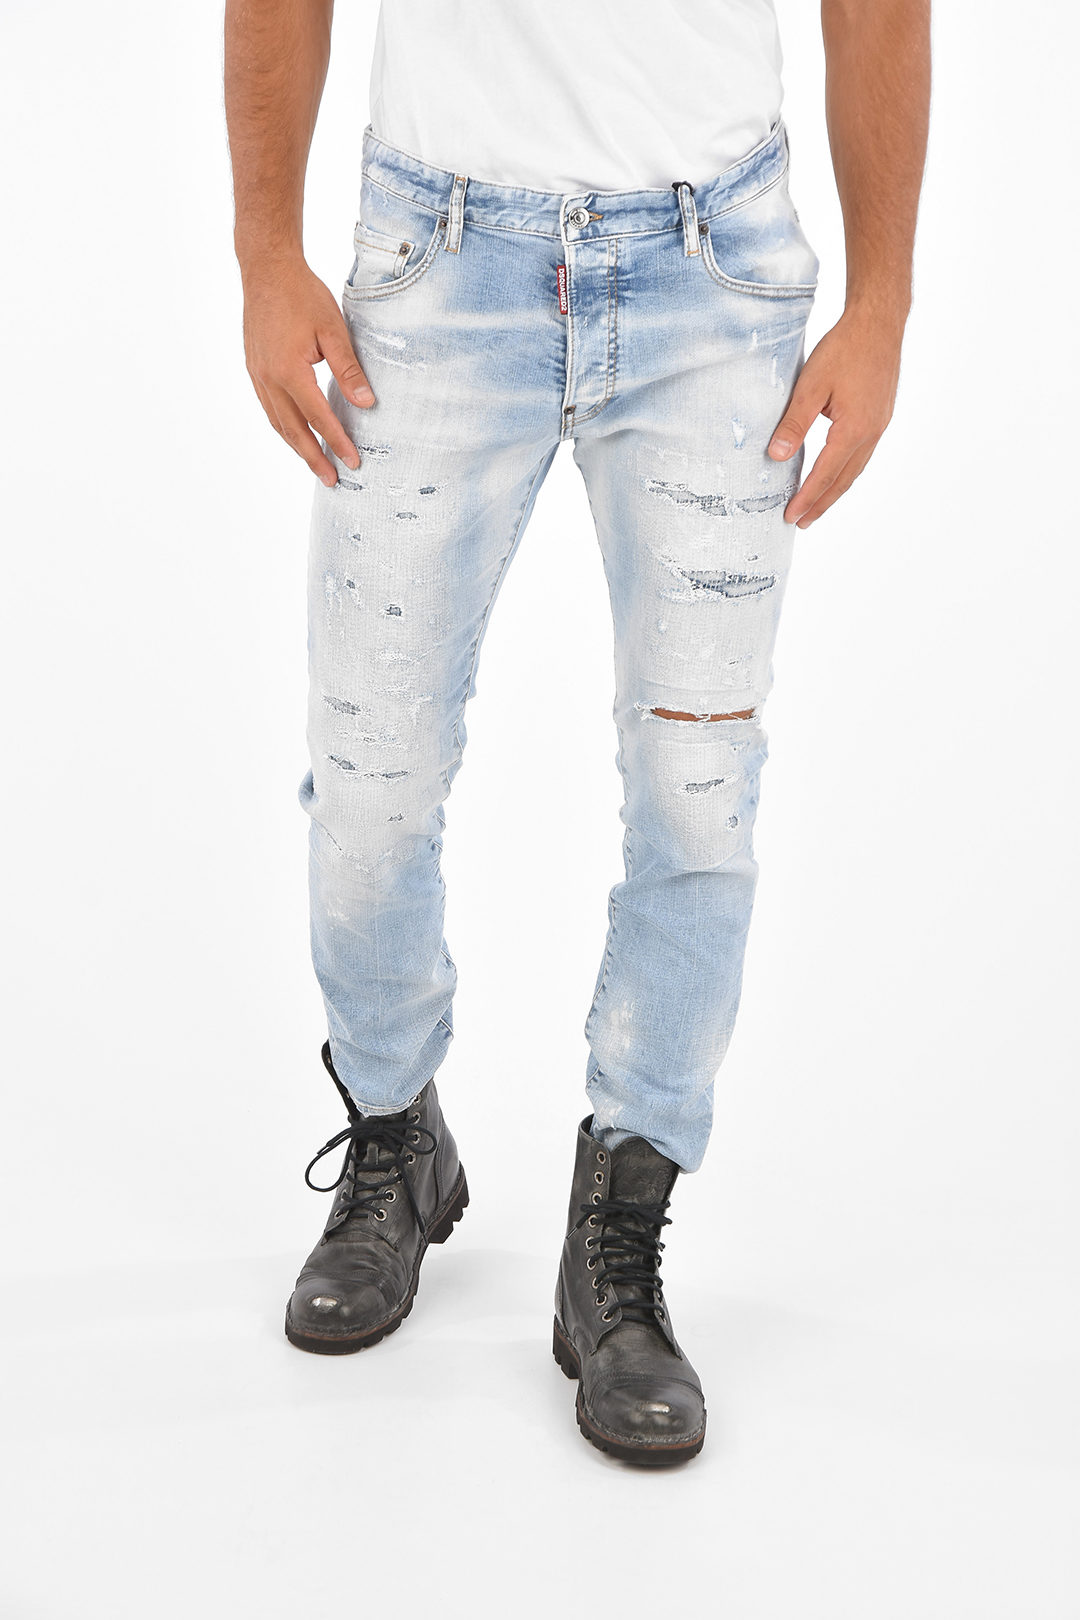 washed-out-skater-distressed-jeans-17-cm_1018107_zoom.jpg